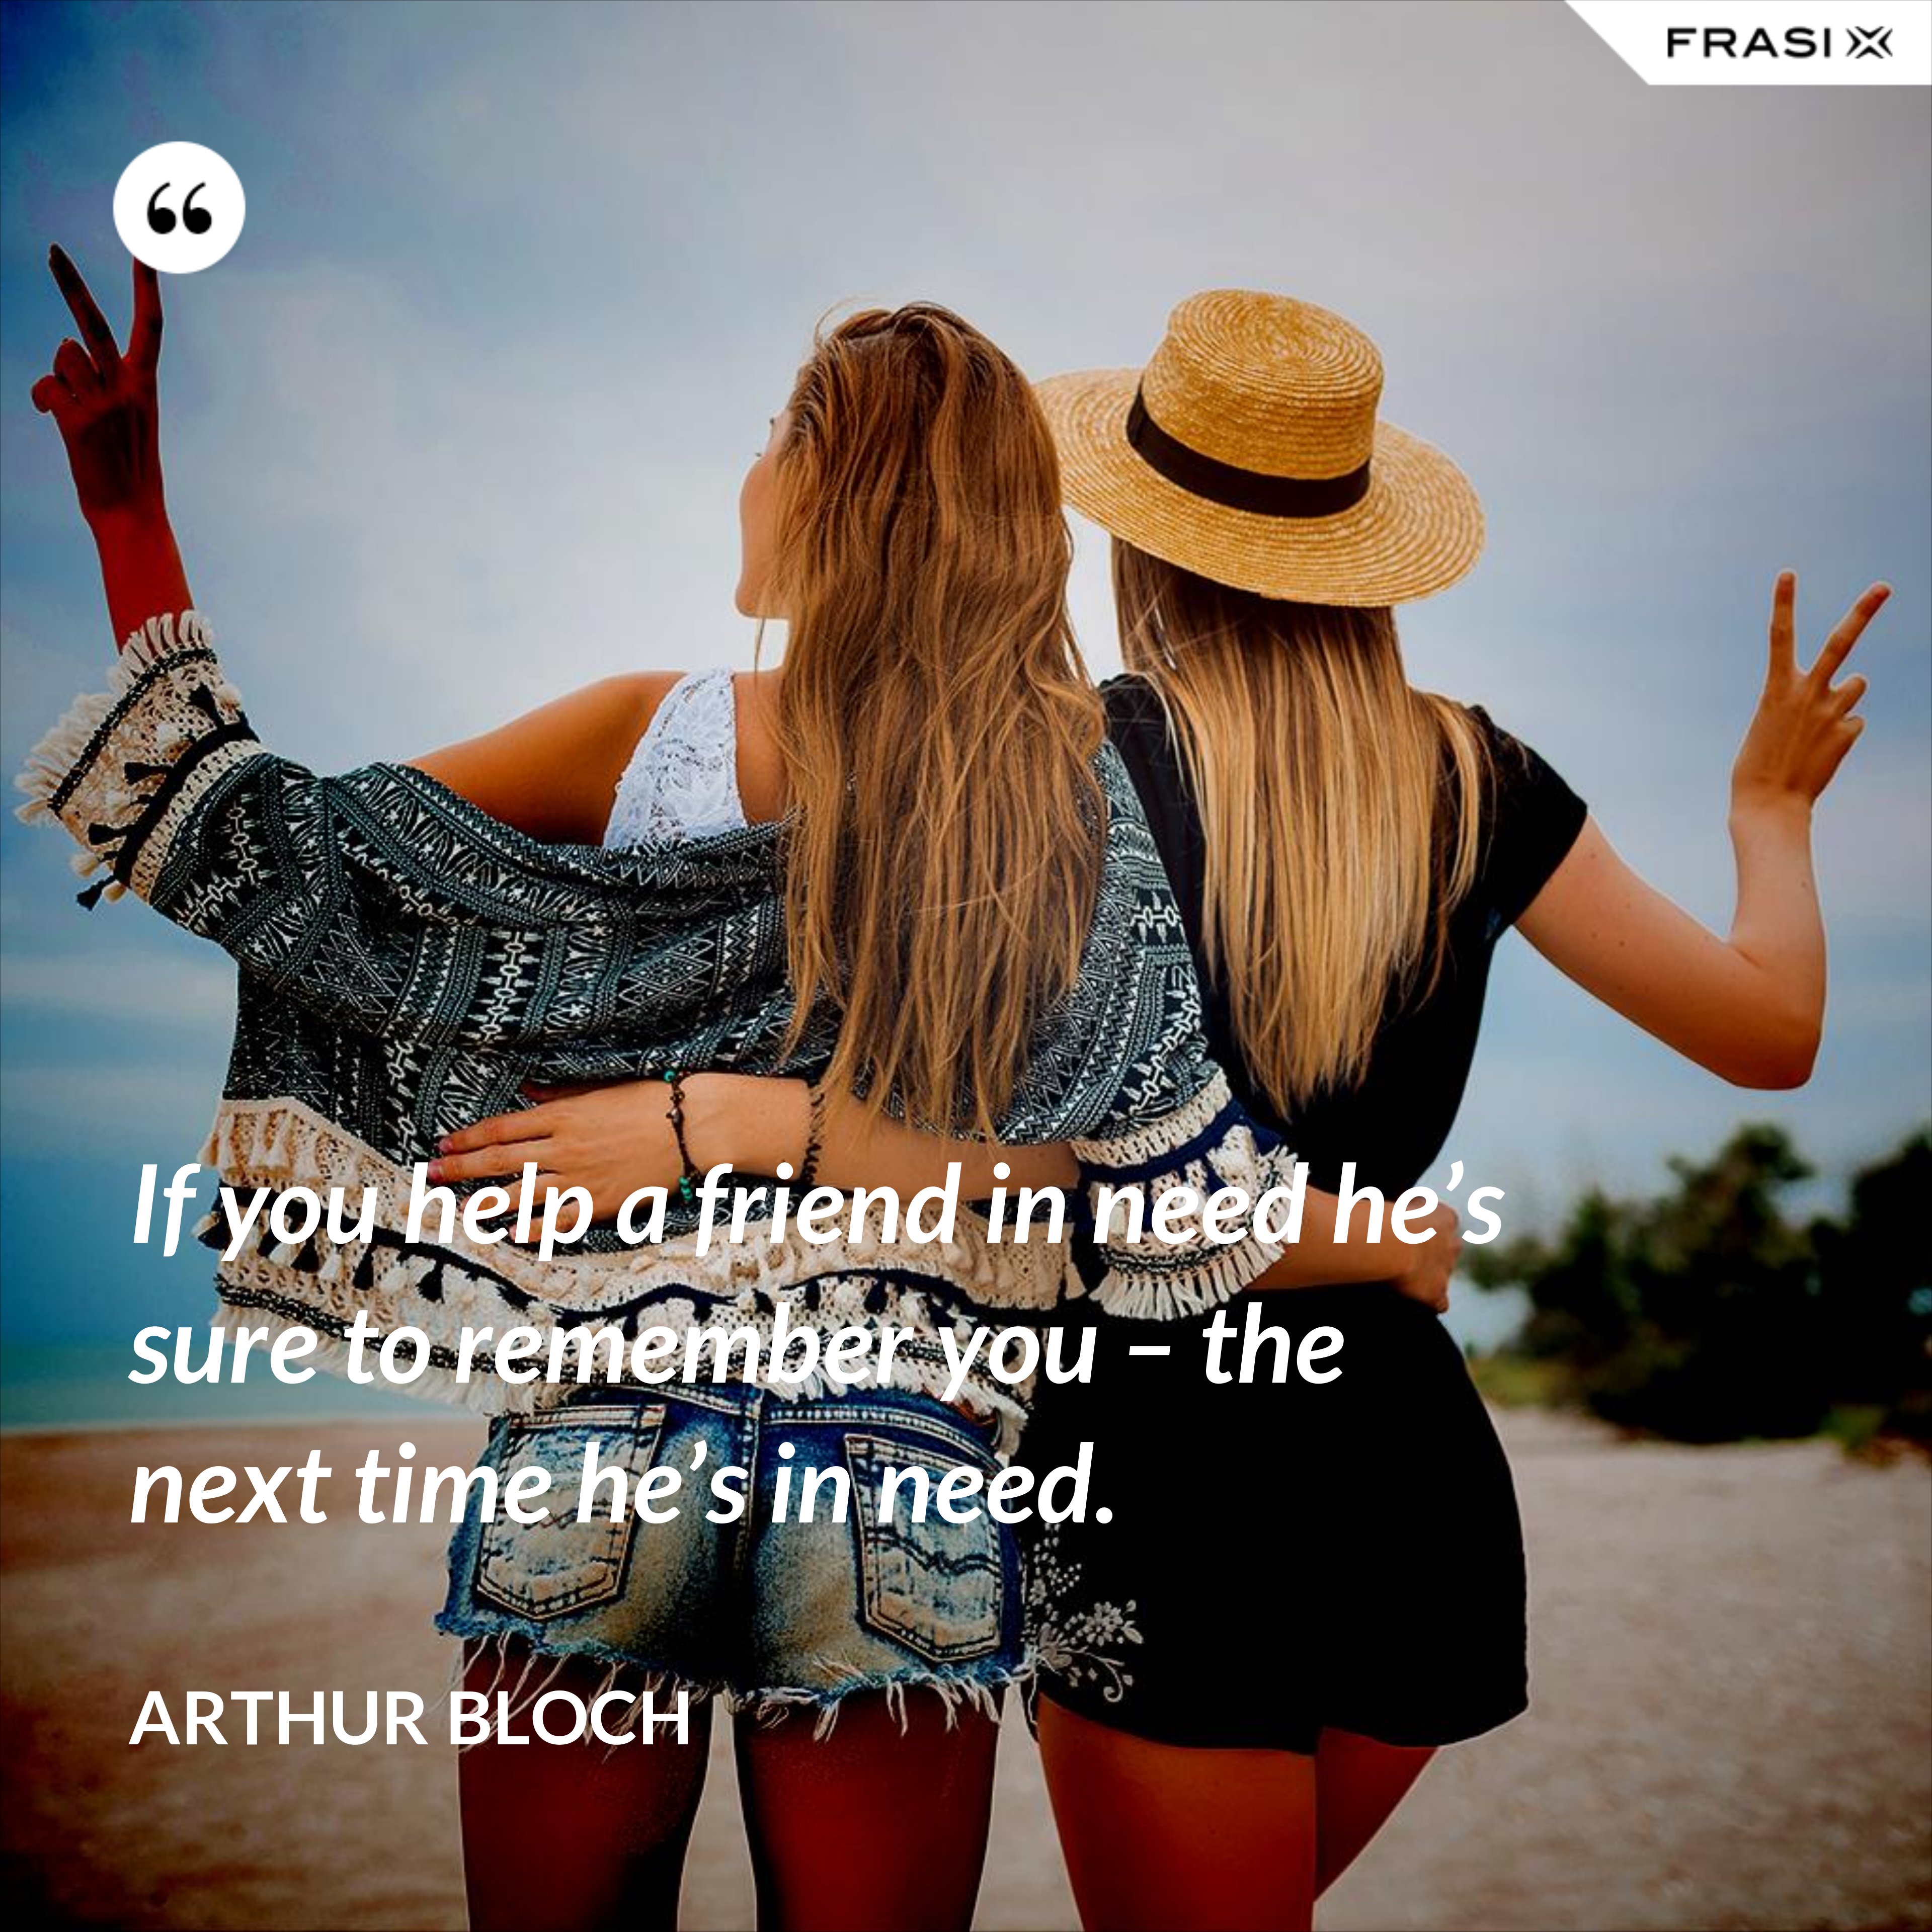 If you help a friend in need he’s sure to remember you – the next time he’s in need. - Arthur Bloch